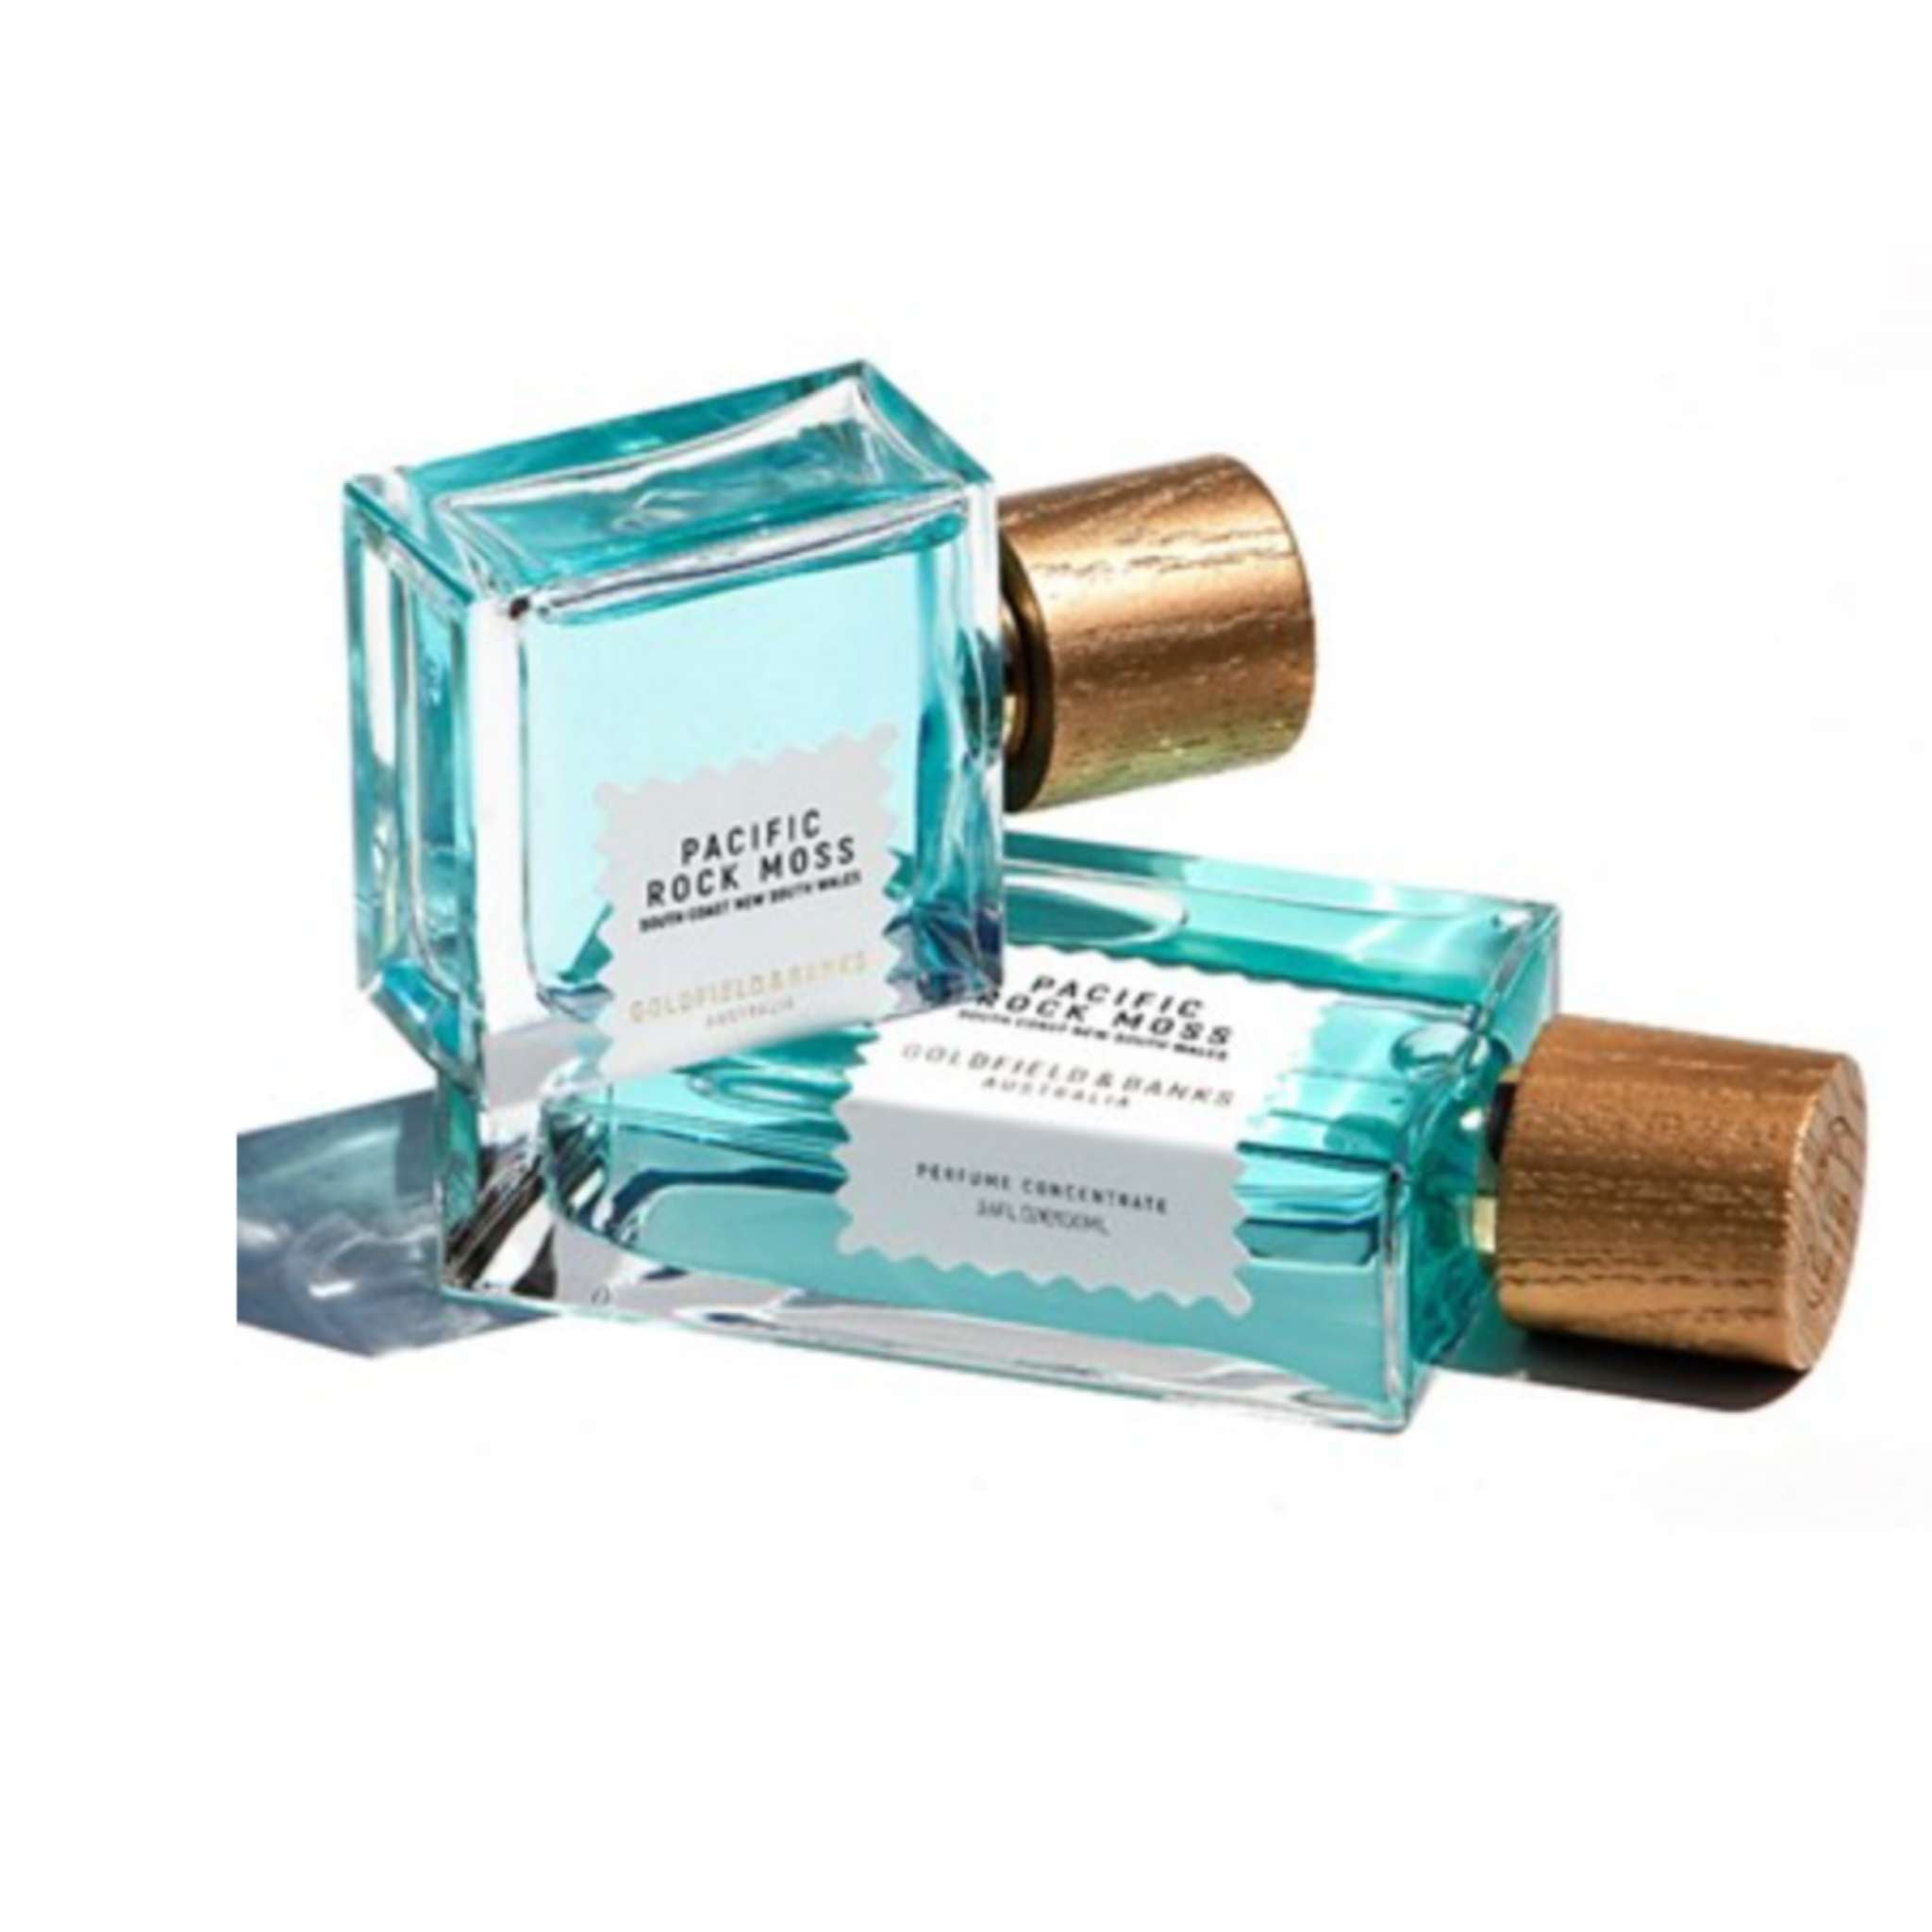 Pacific Rock Moss - Goldfield & Banks - INDIEHOUSE modern fragrances